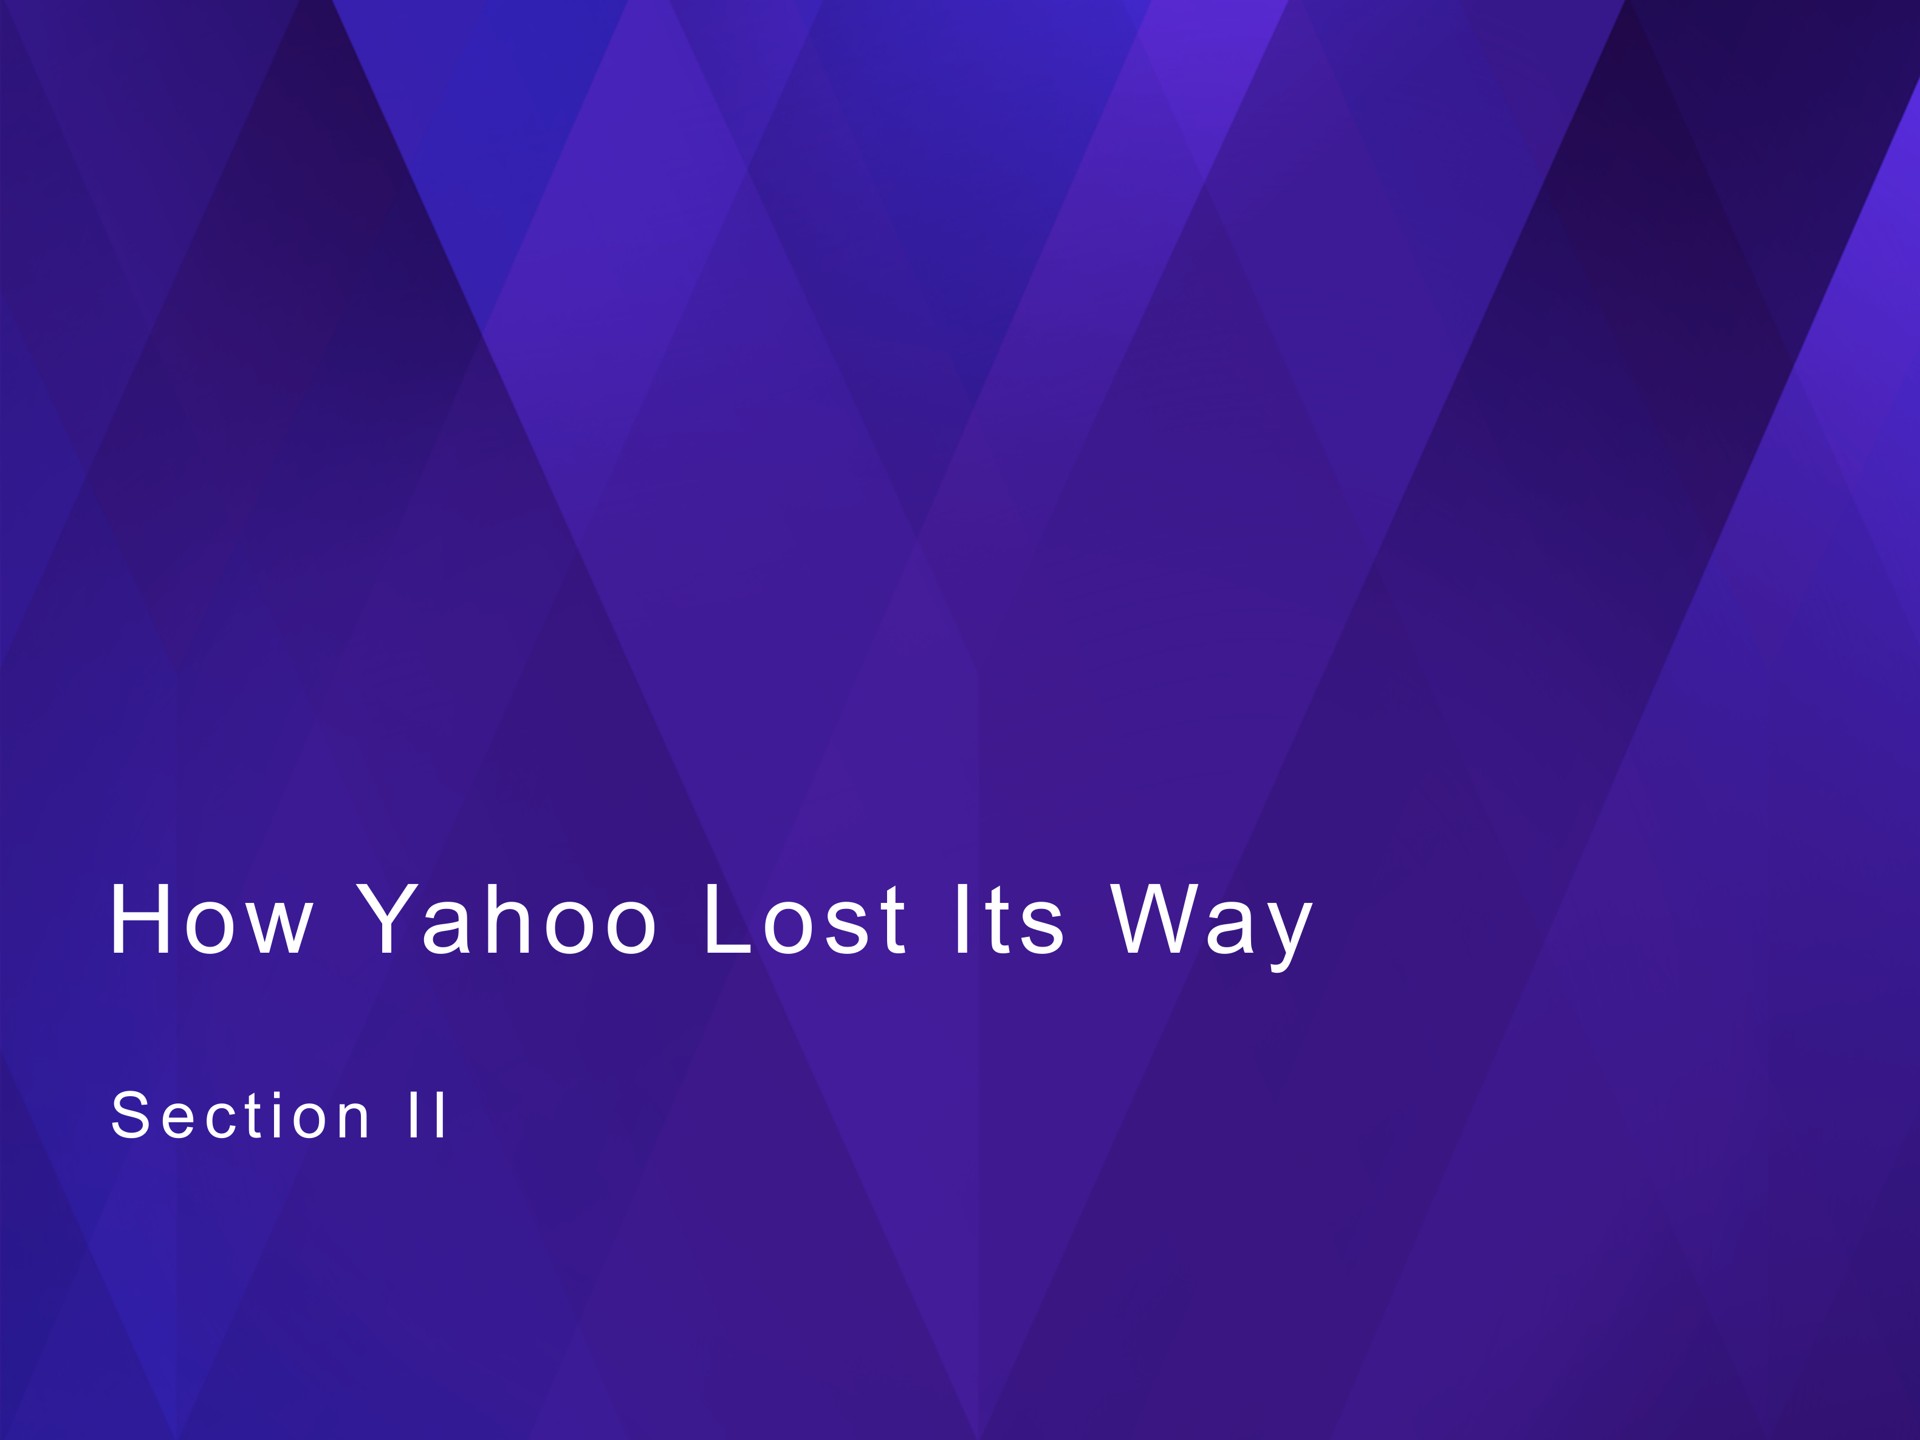 how yahoo lost its way | SpringOwl